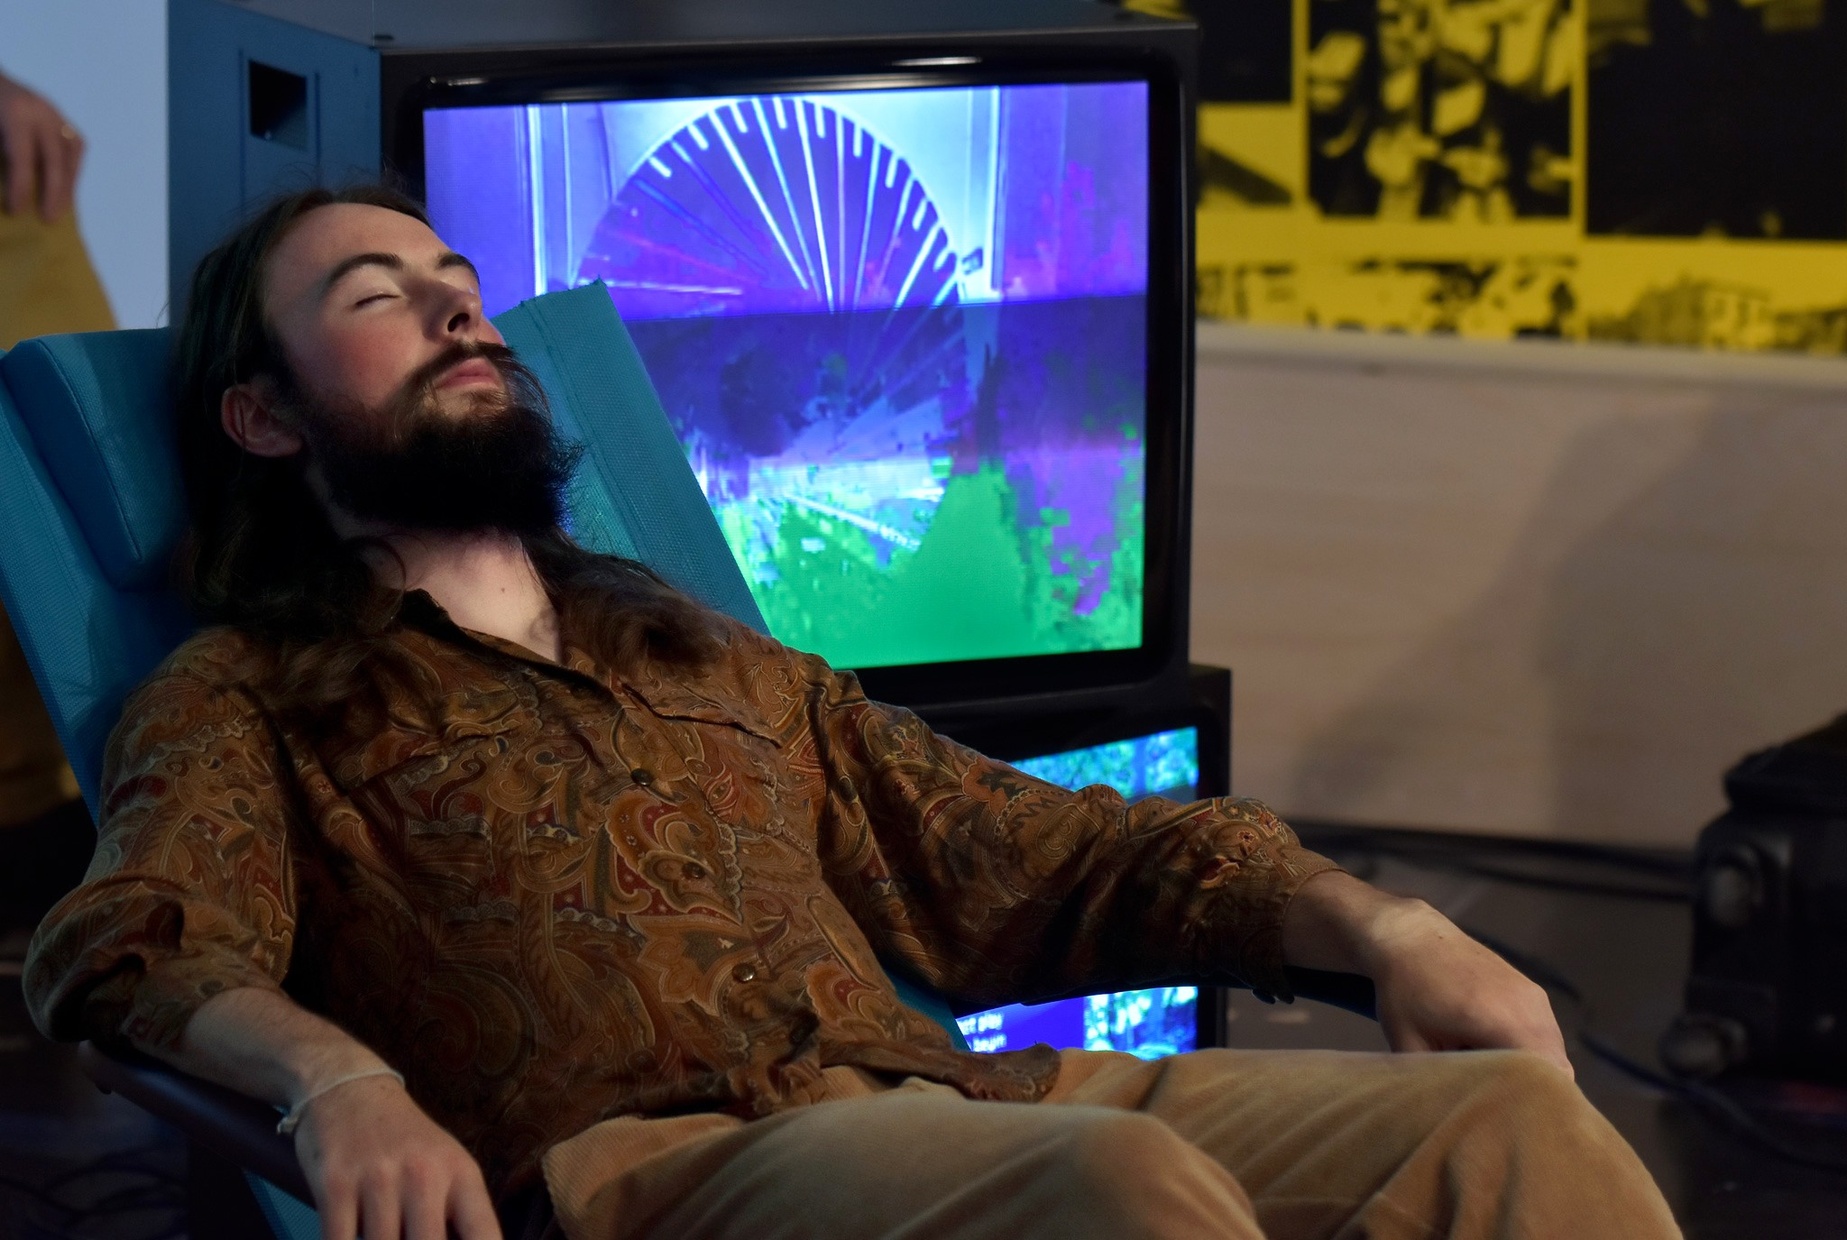 A light-skinned, young man in a tan, paisley shirt reclines in a cushioned blue chair with his eyes closed in front of two TVs stacked on top of each other displaying abstract patterns.